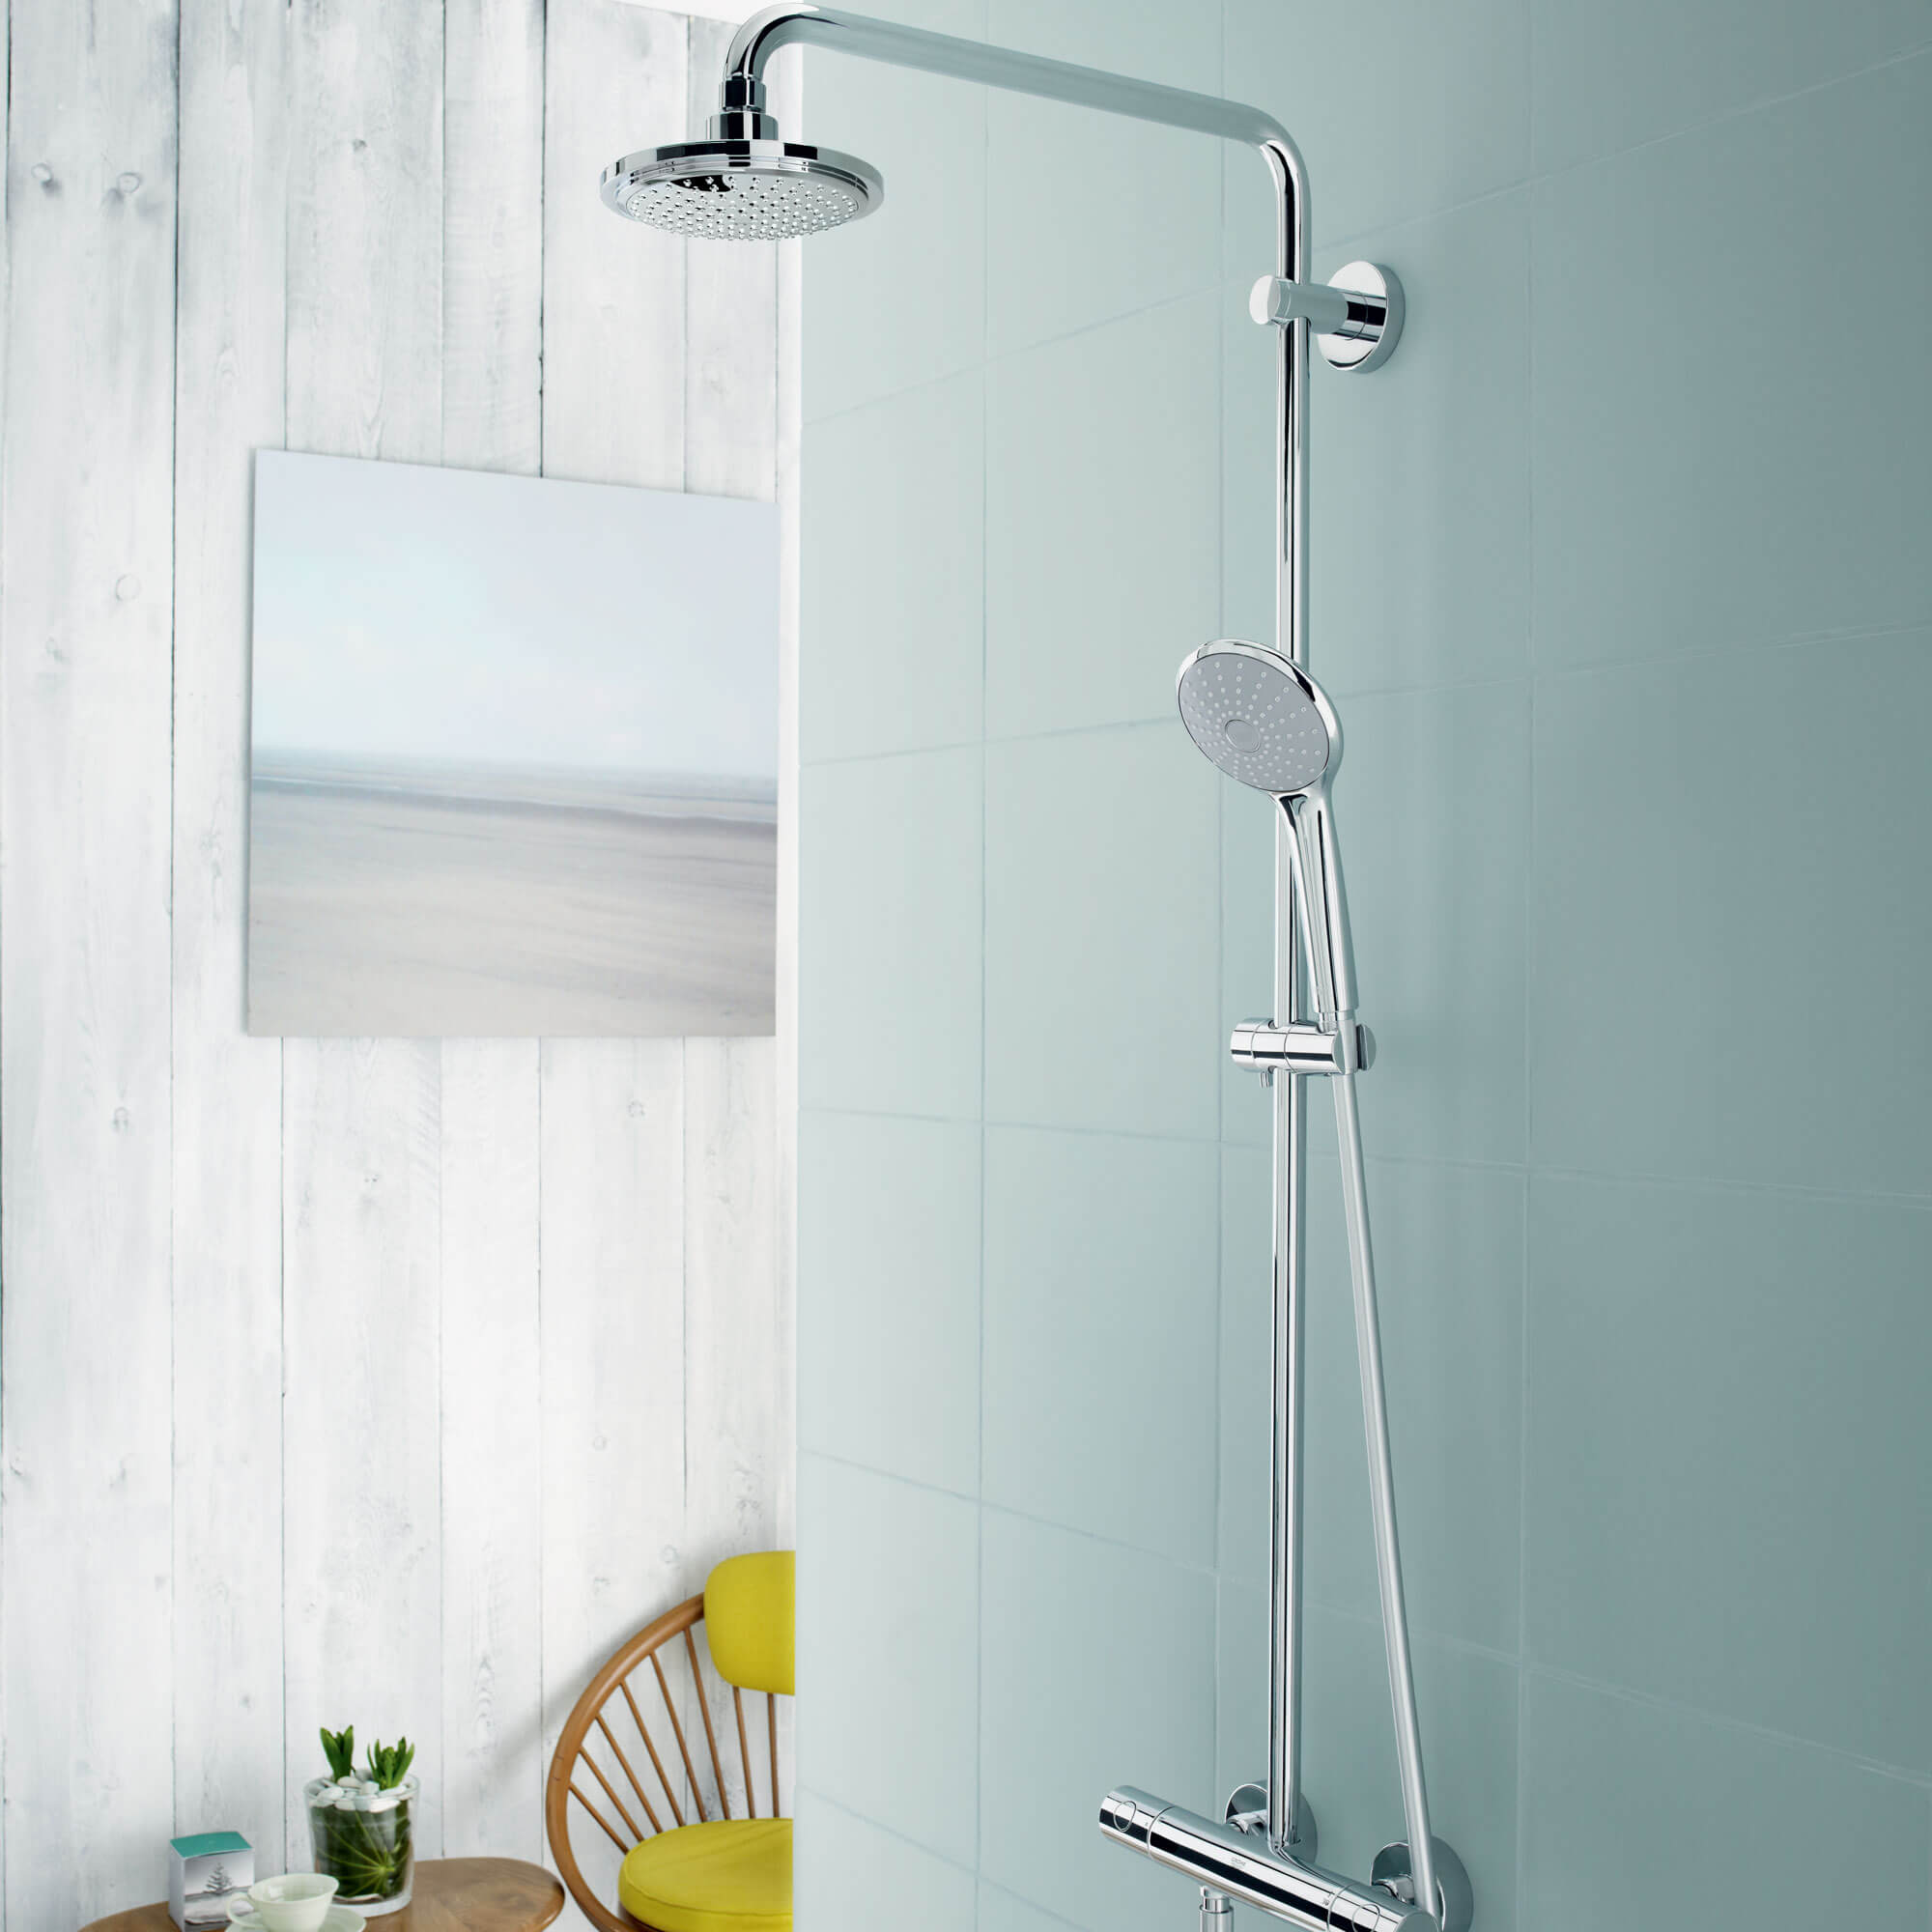 Image of the Euphoria shower system with a blue background.